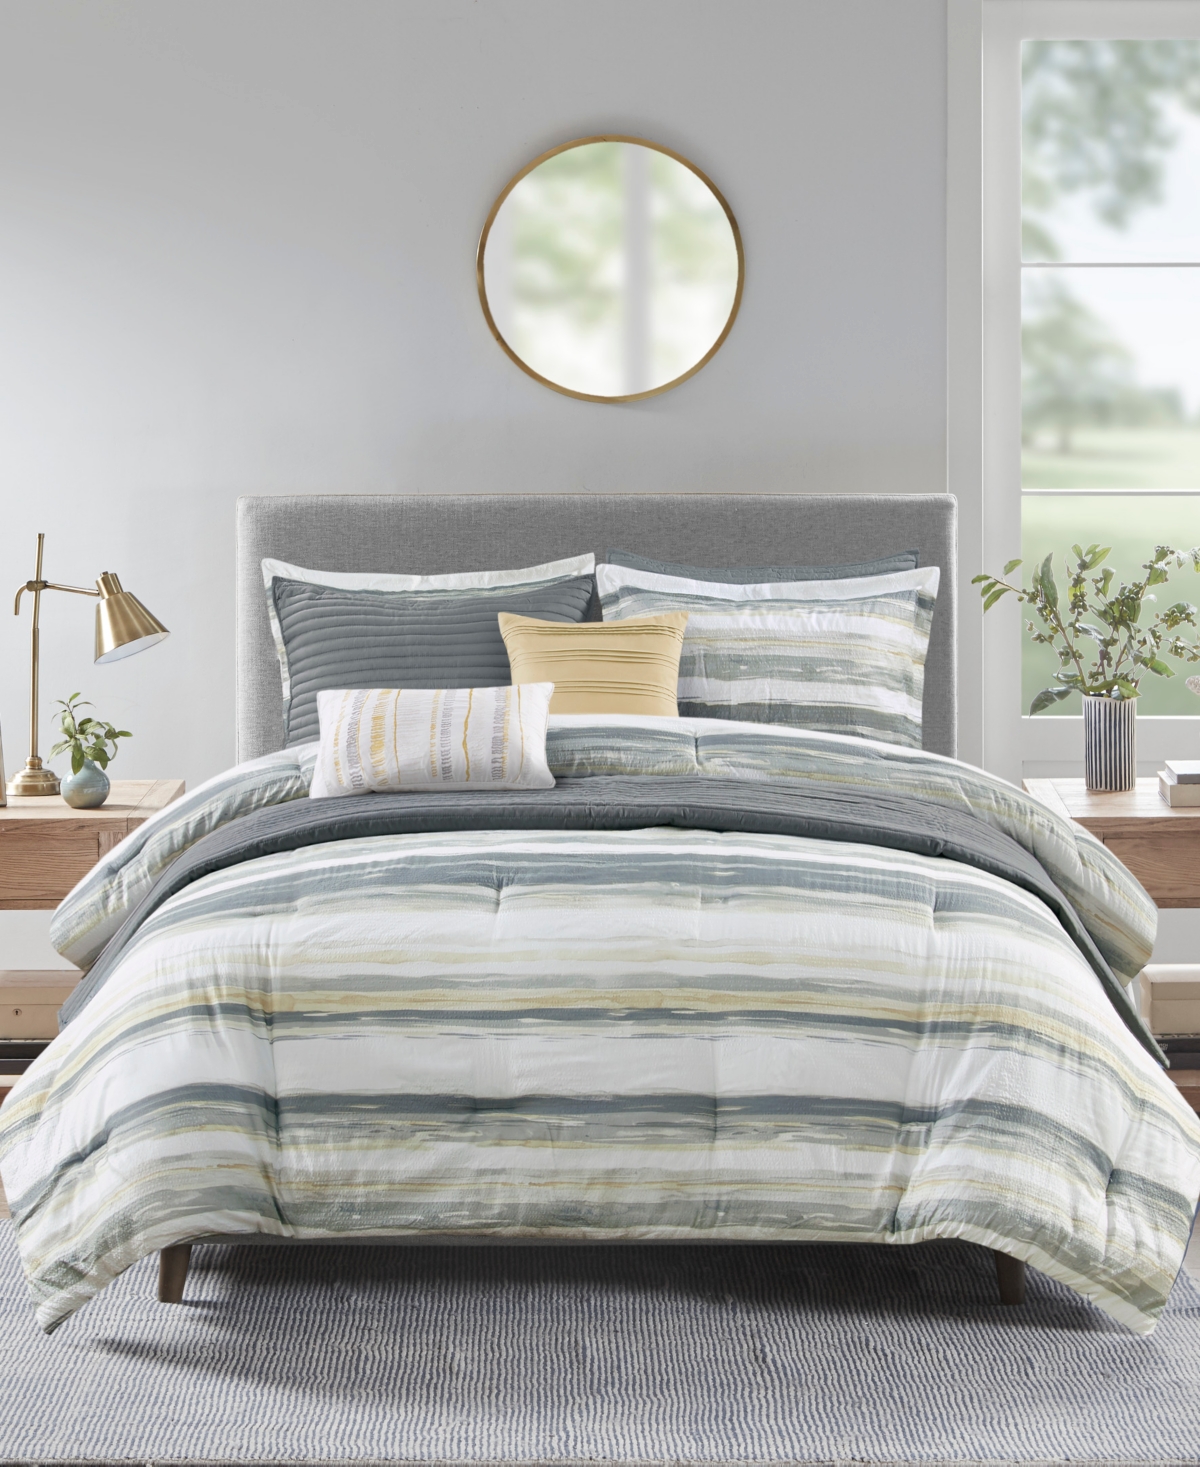 Madison Park Marina 8 Piece Printed Seersucker Comforter And Coverlet Set Collection, Full/queen In Yellow